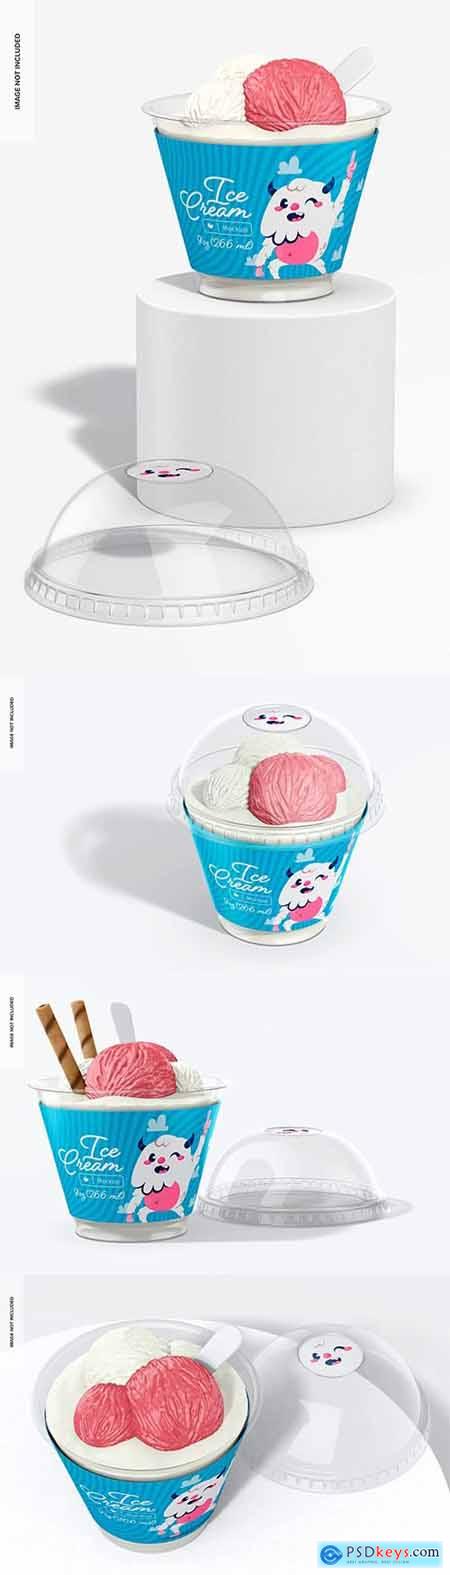 9 oz ice cream cup with lid mockup